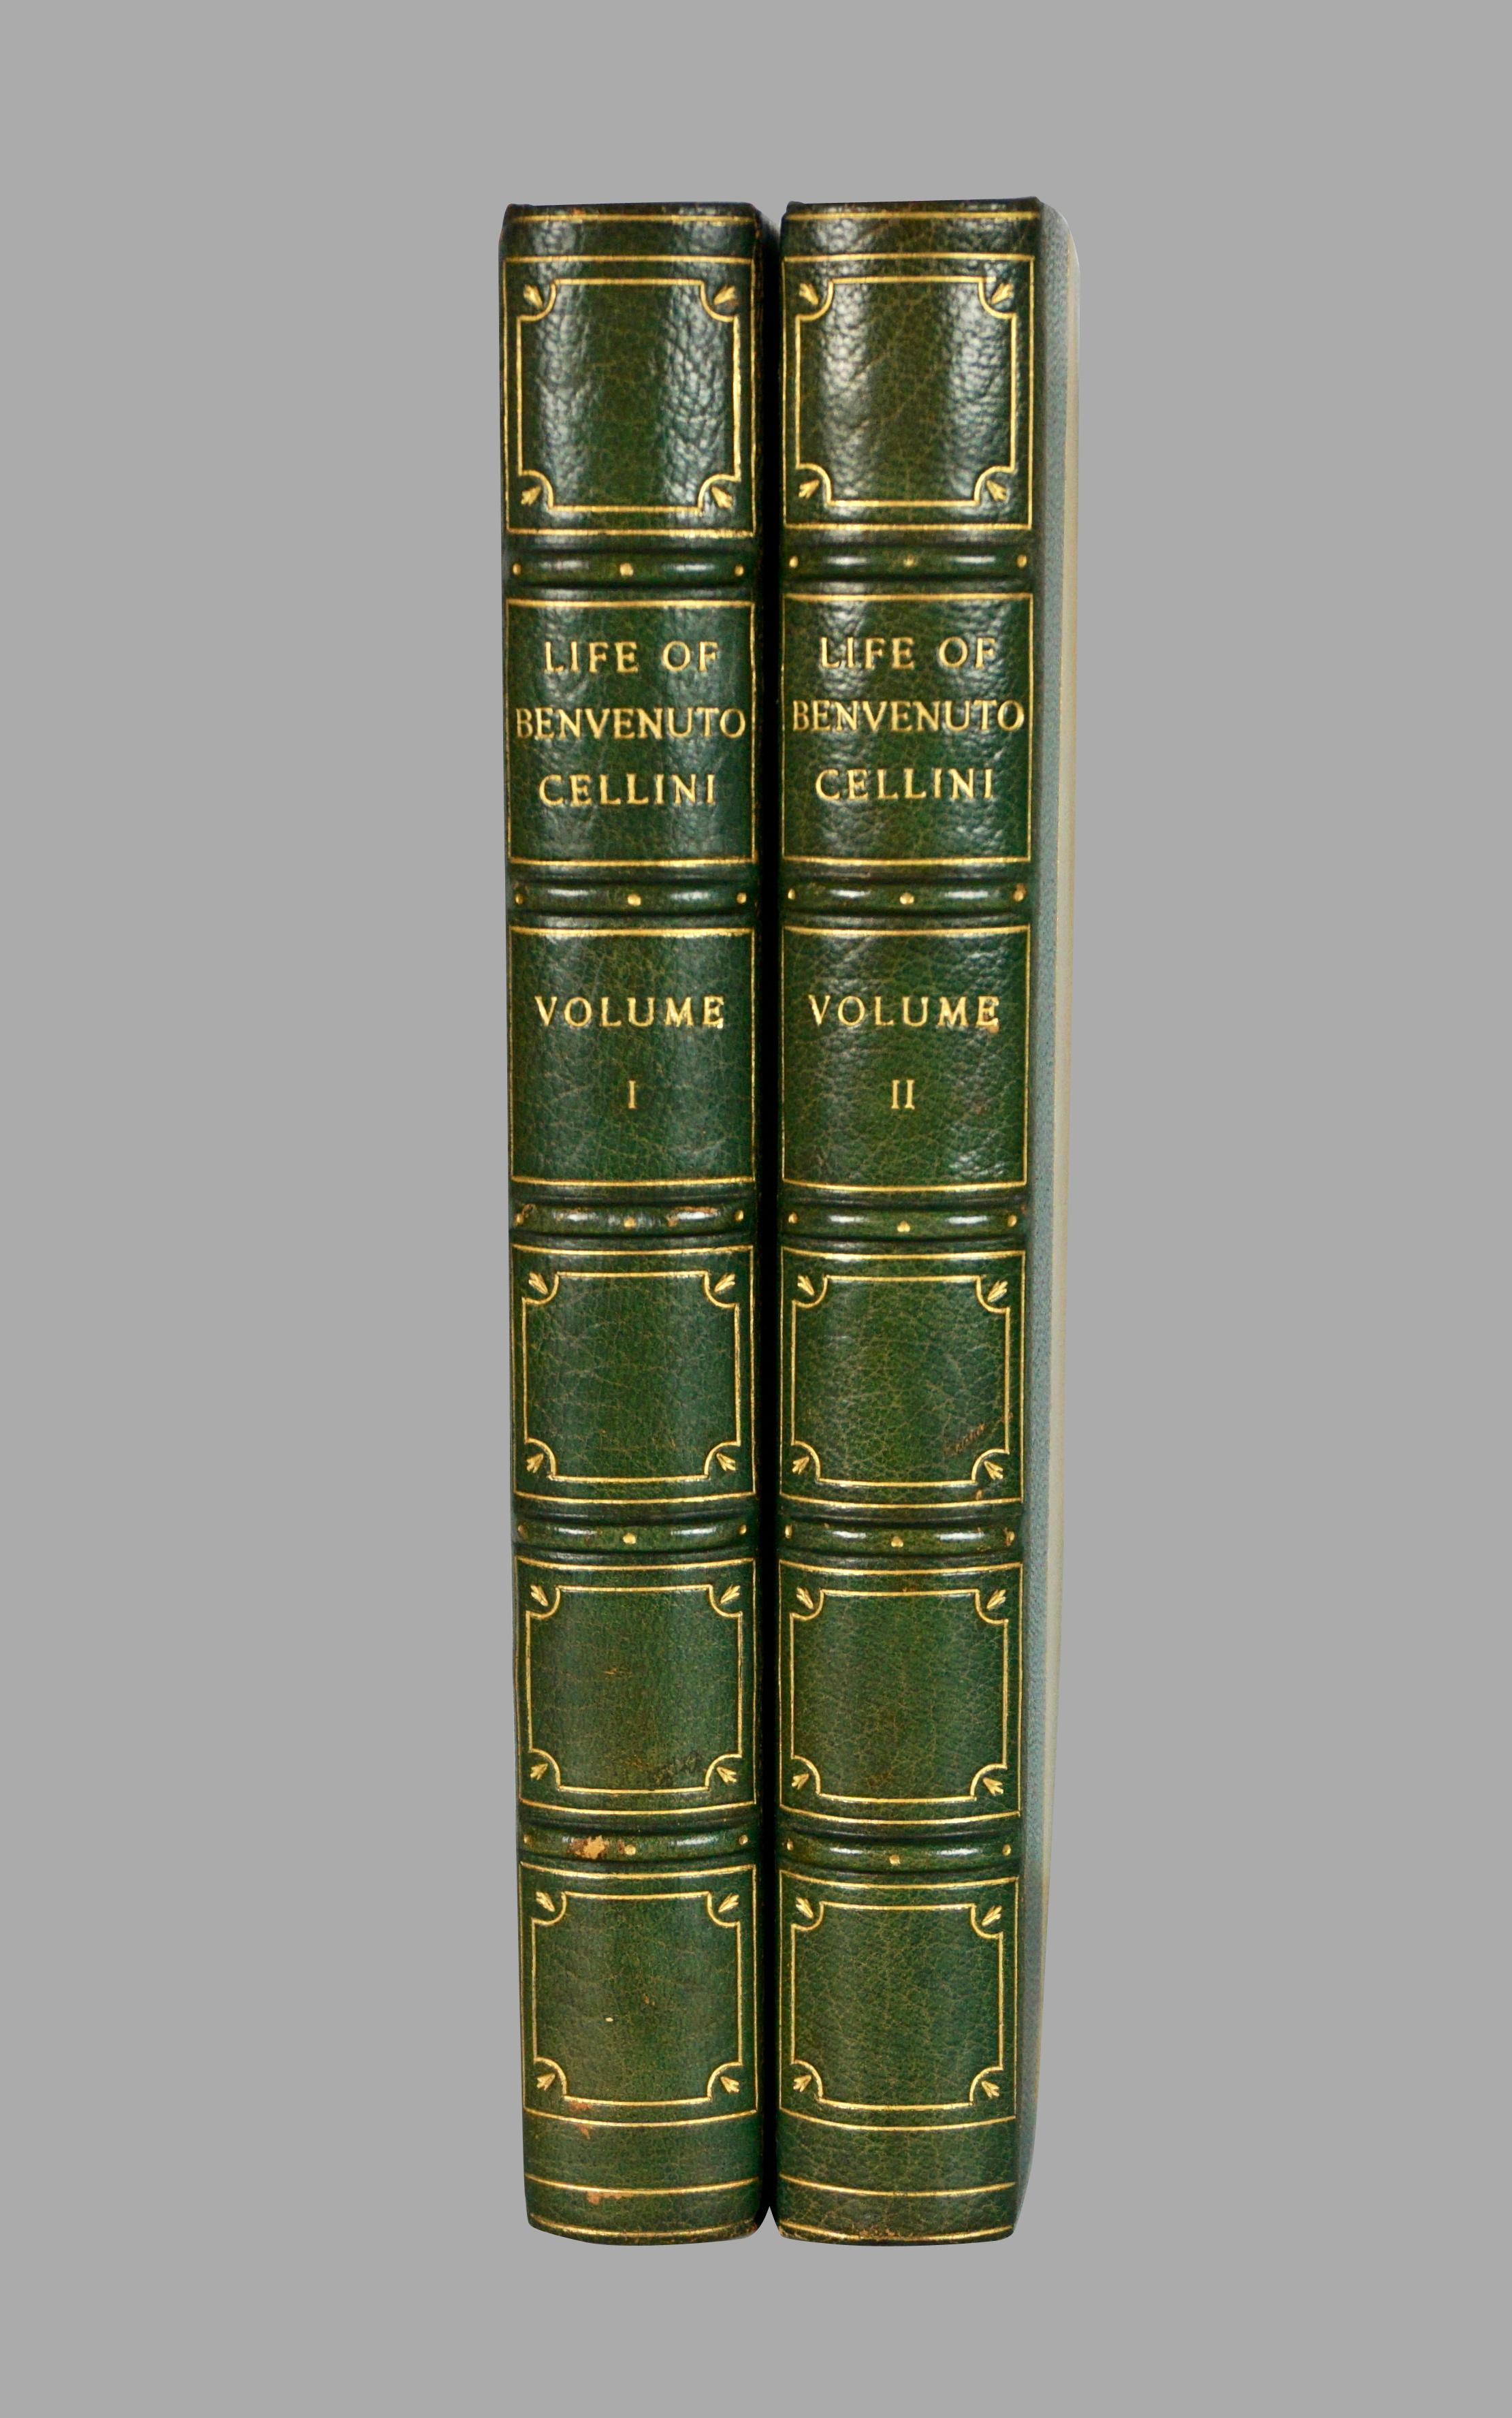 The Life of Benvenuto Cellini in 2 volumes. Published: 1906 by Brentanos. Top edges gilt. Cellini (1500-1571) was an Italian Renaissance goldsmith, sculptor, and author whose most famous works include the bronze statue of Perseus holding the head of